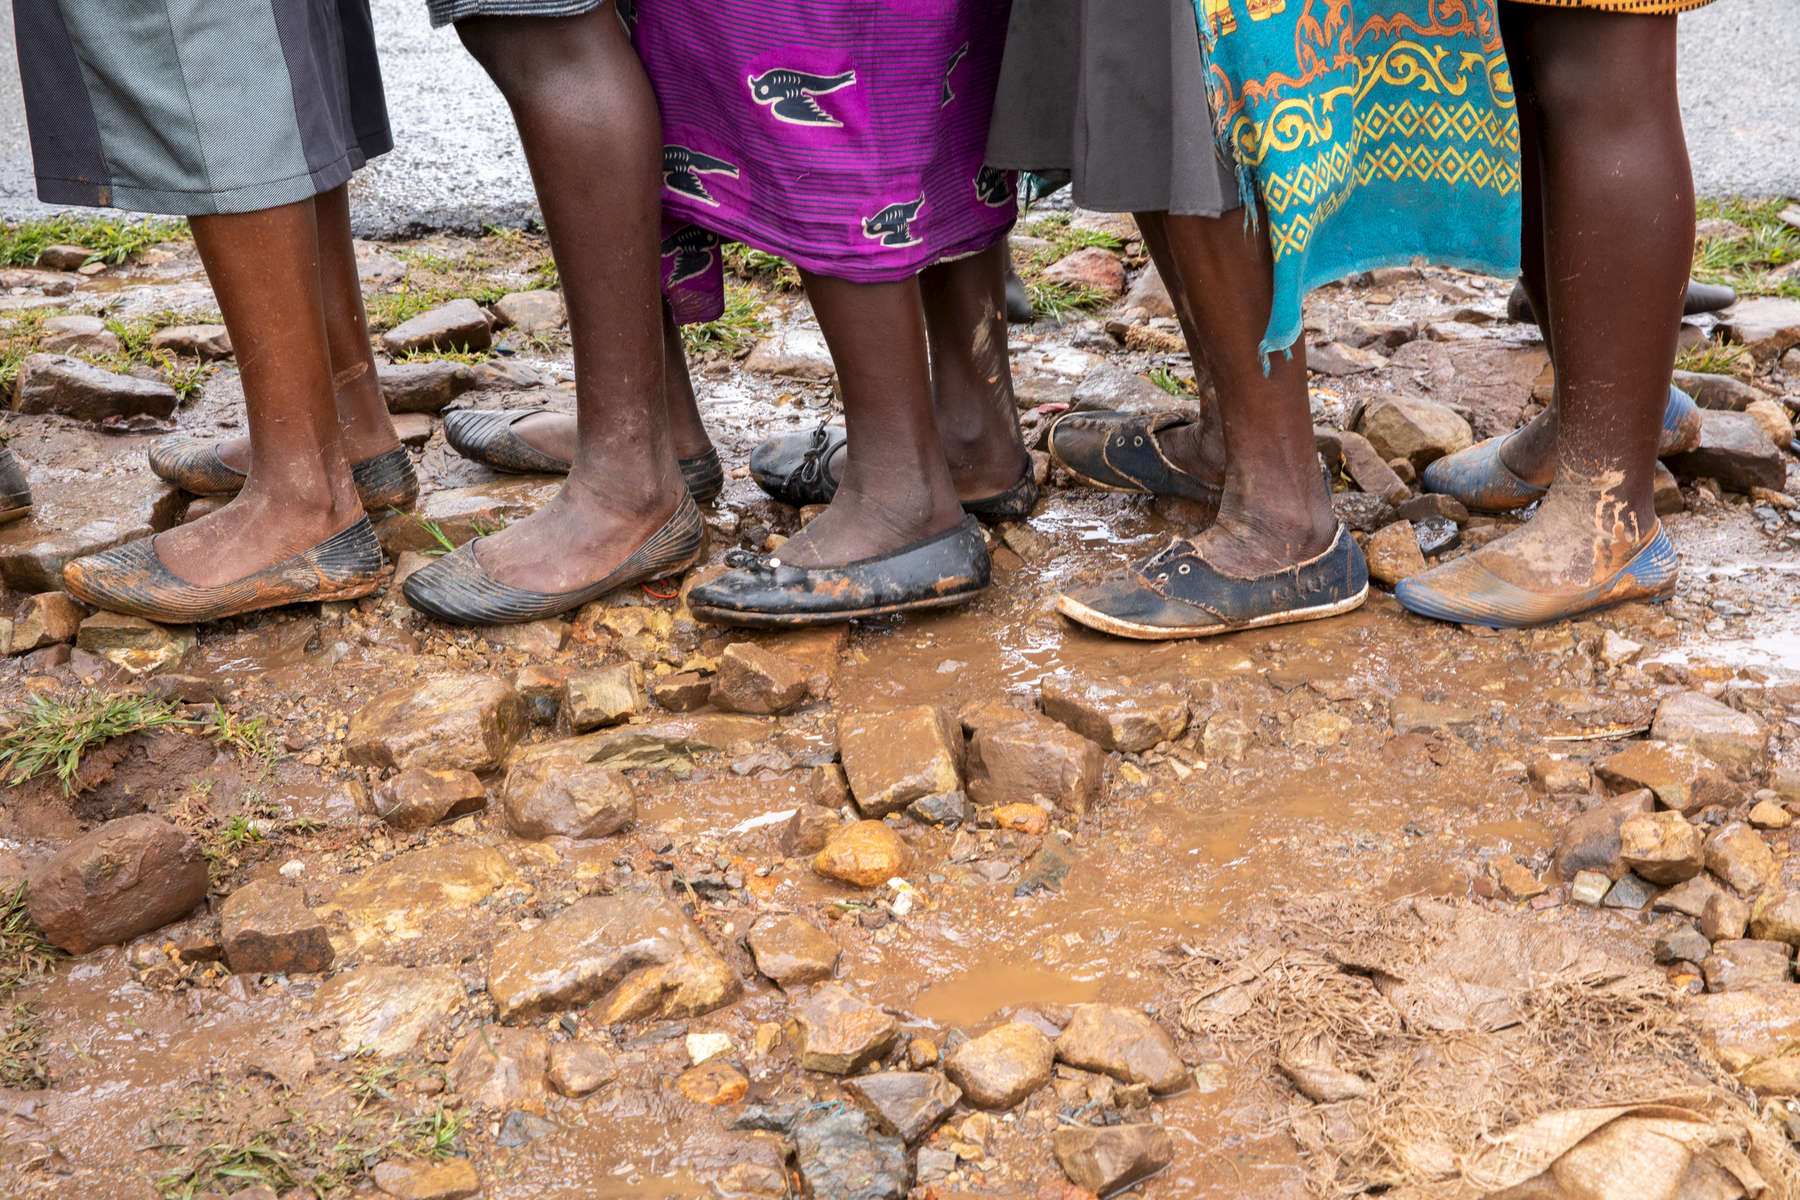 Women wait in line for food at a distribution point called Skyline, on a ridge surrounded by mudslides.